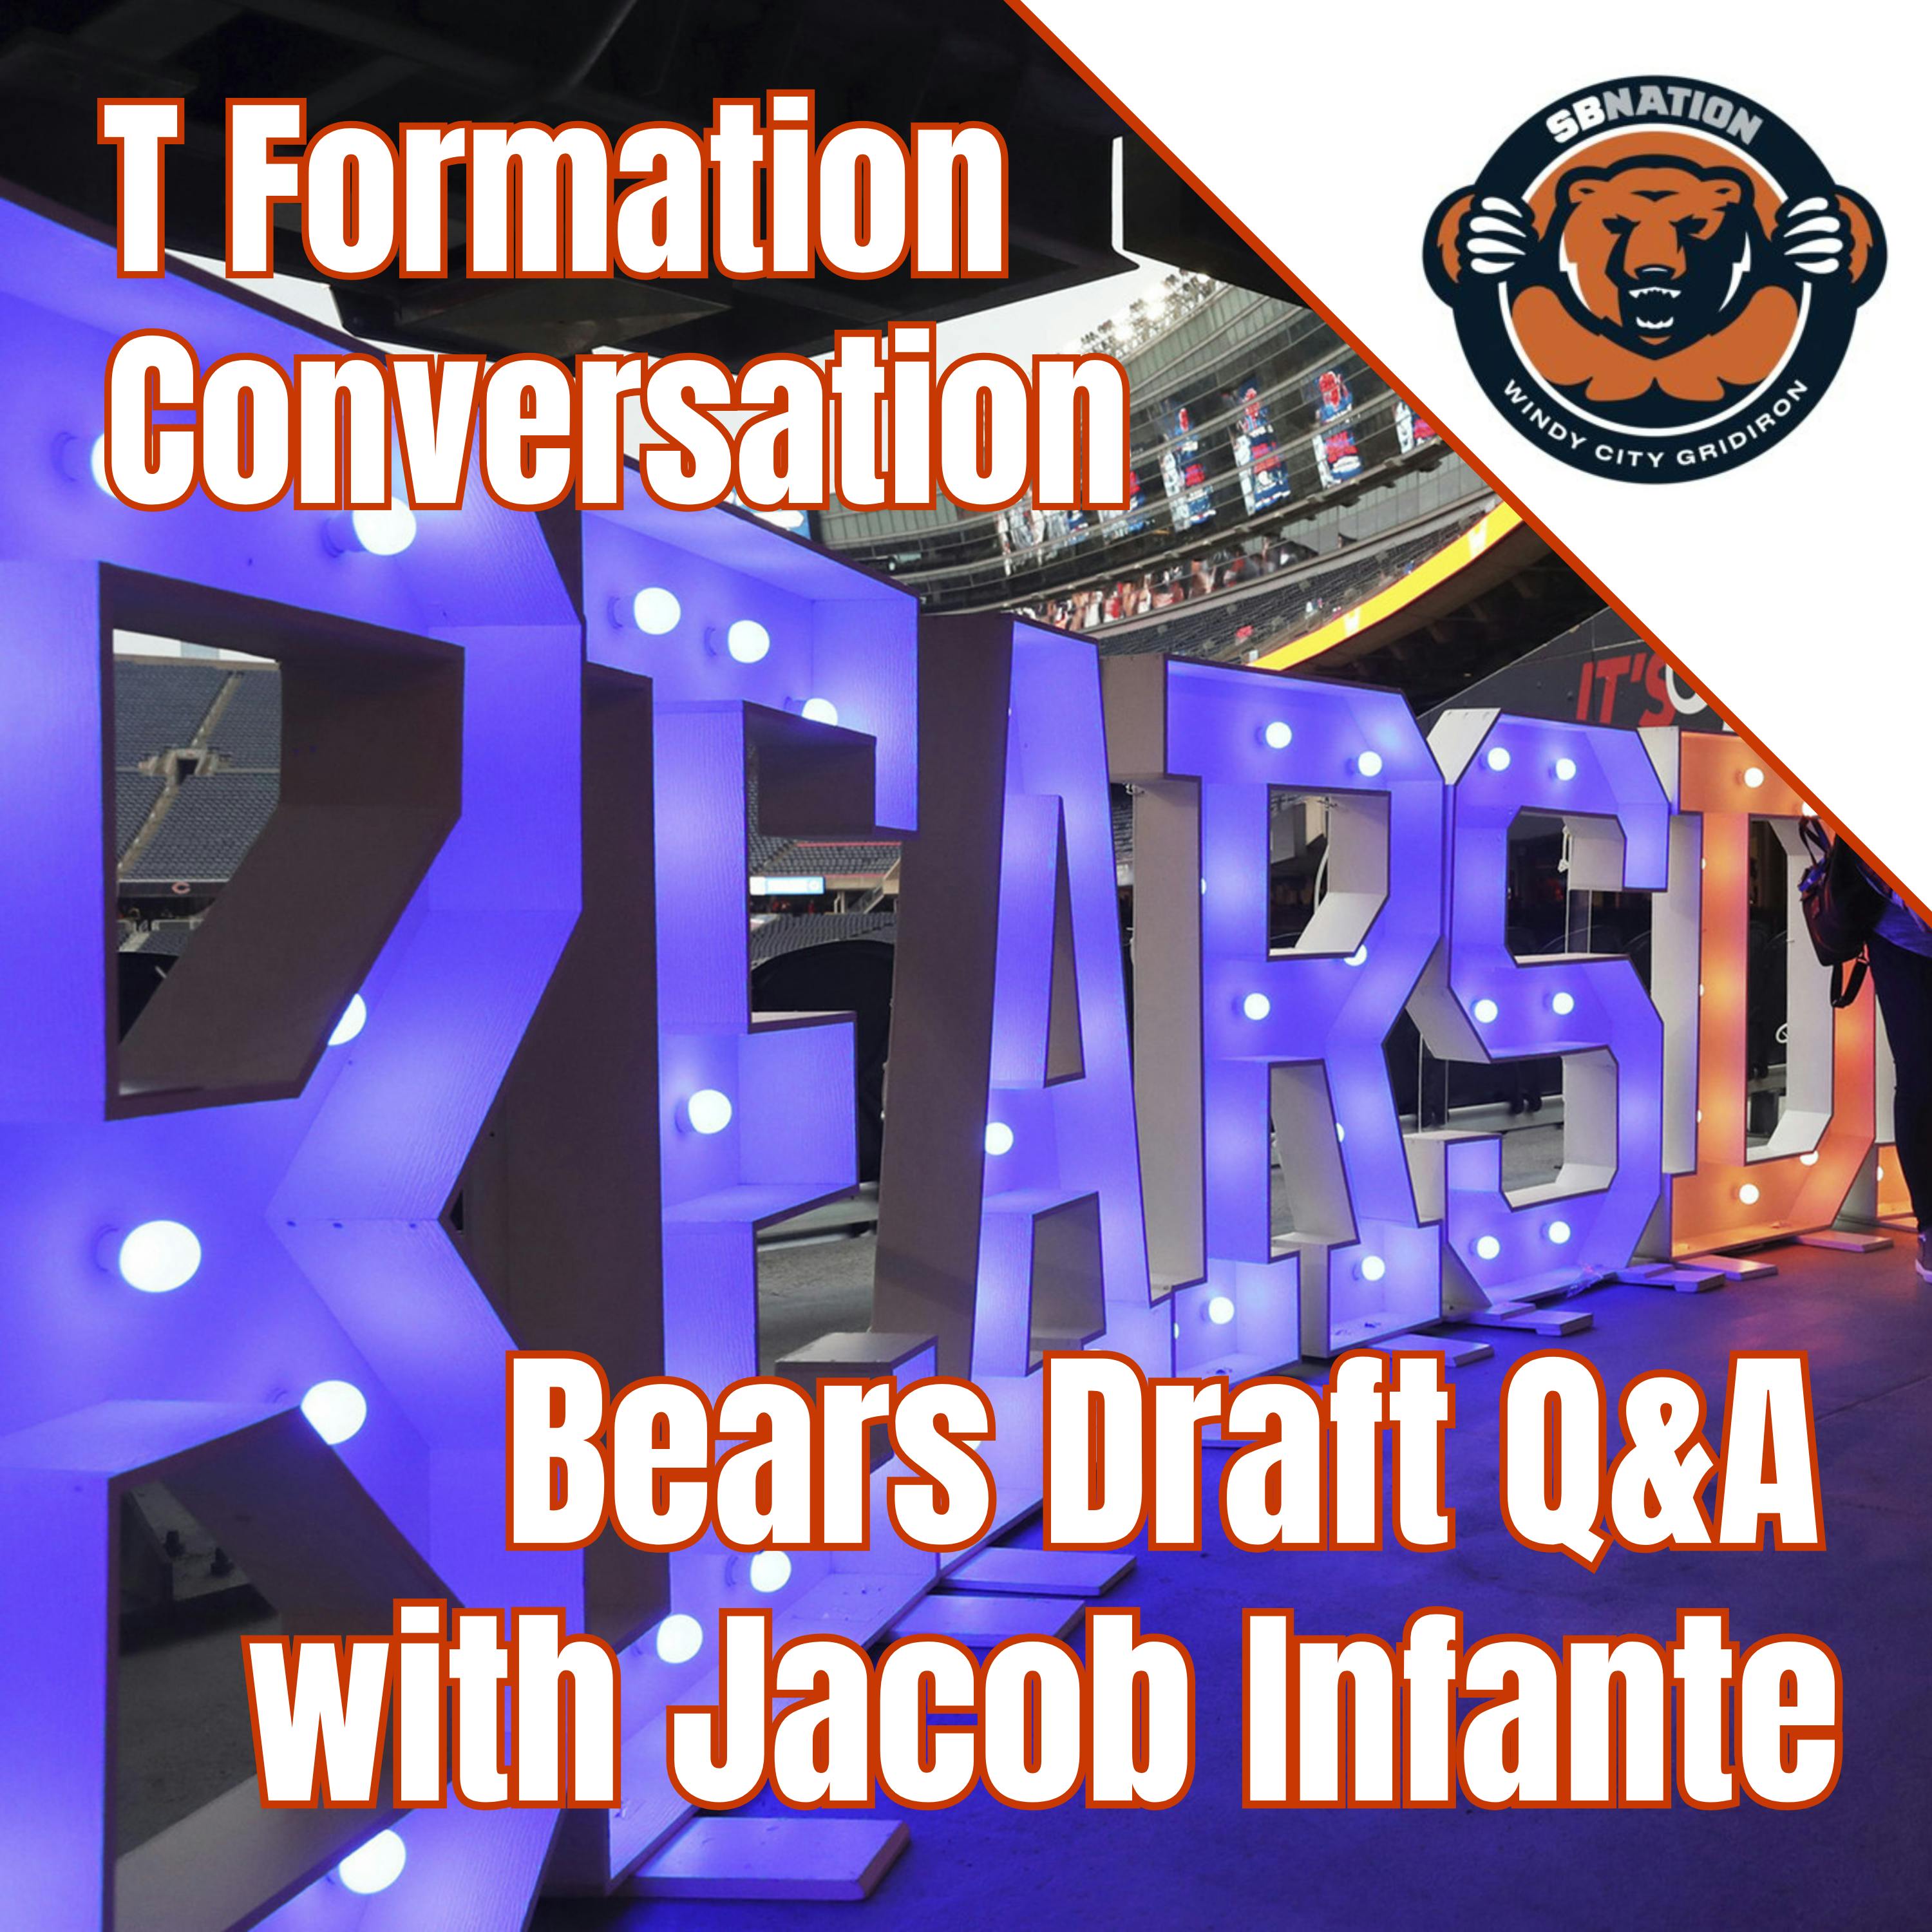 T Formation Conversation: Chicago Bears Draft Q&A with Jacob Infante